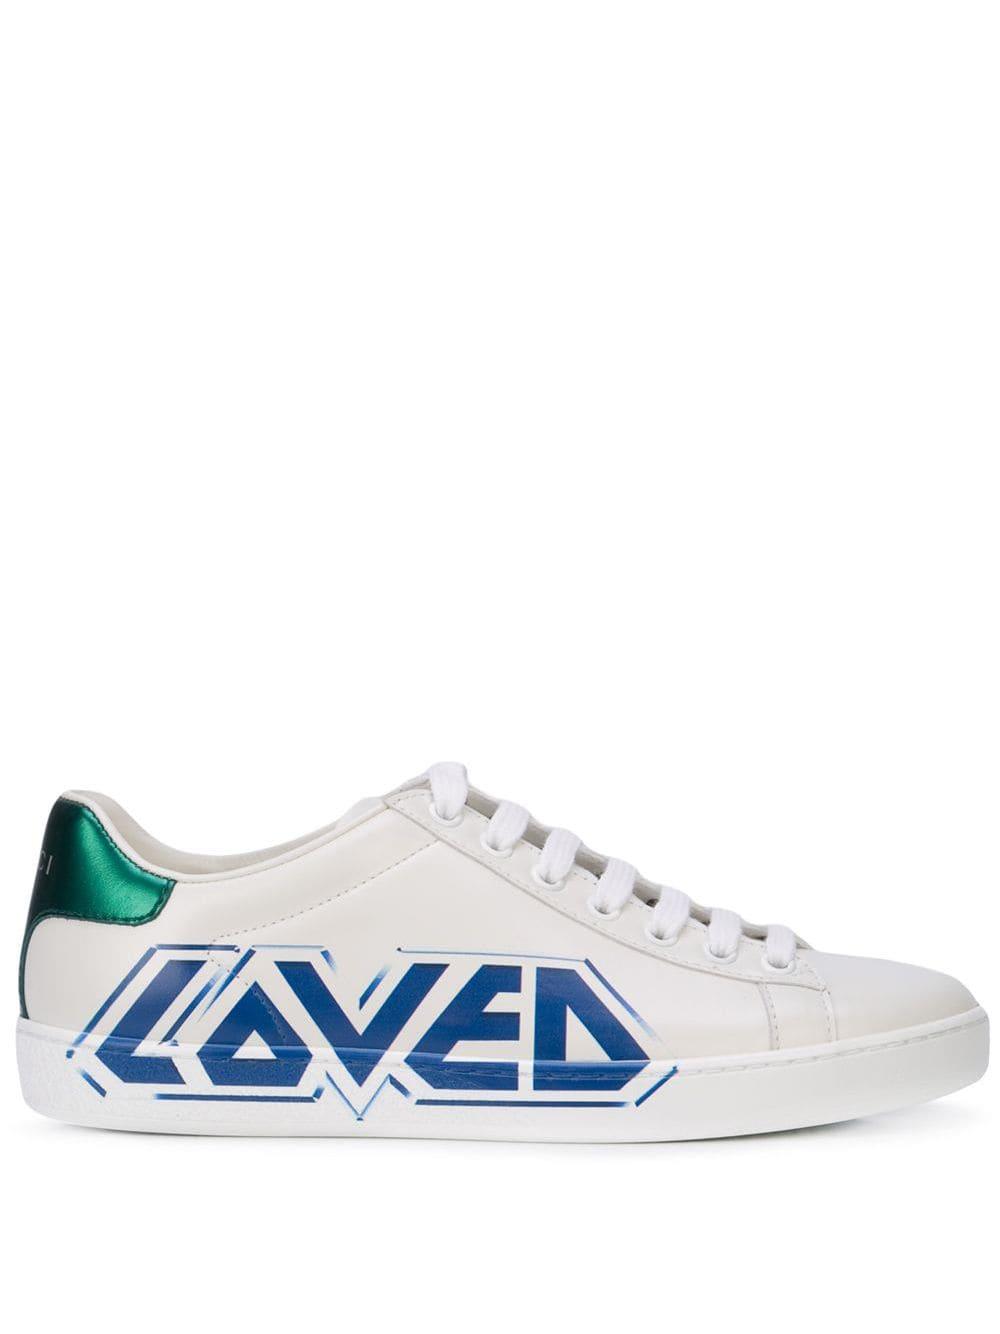 Gucci Leather Loved Sneakers in White - Lyst